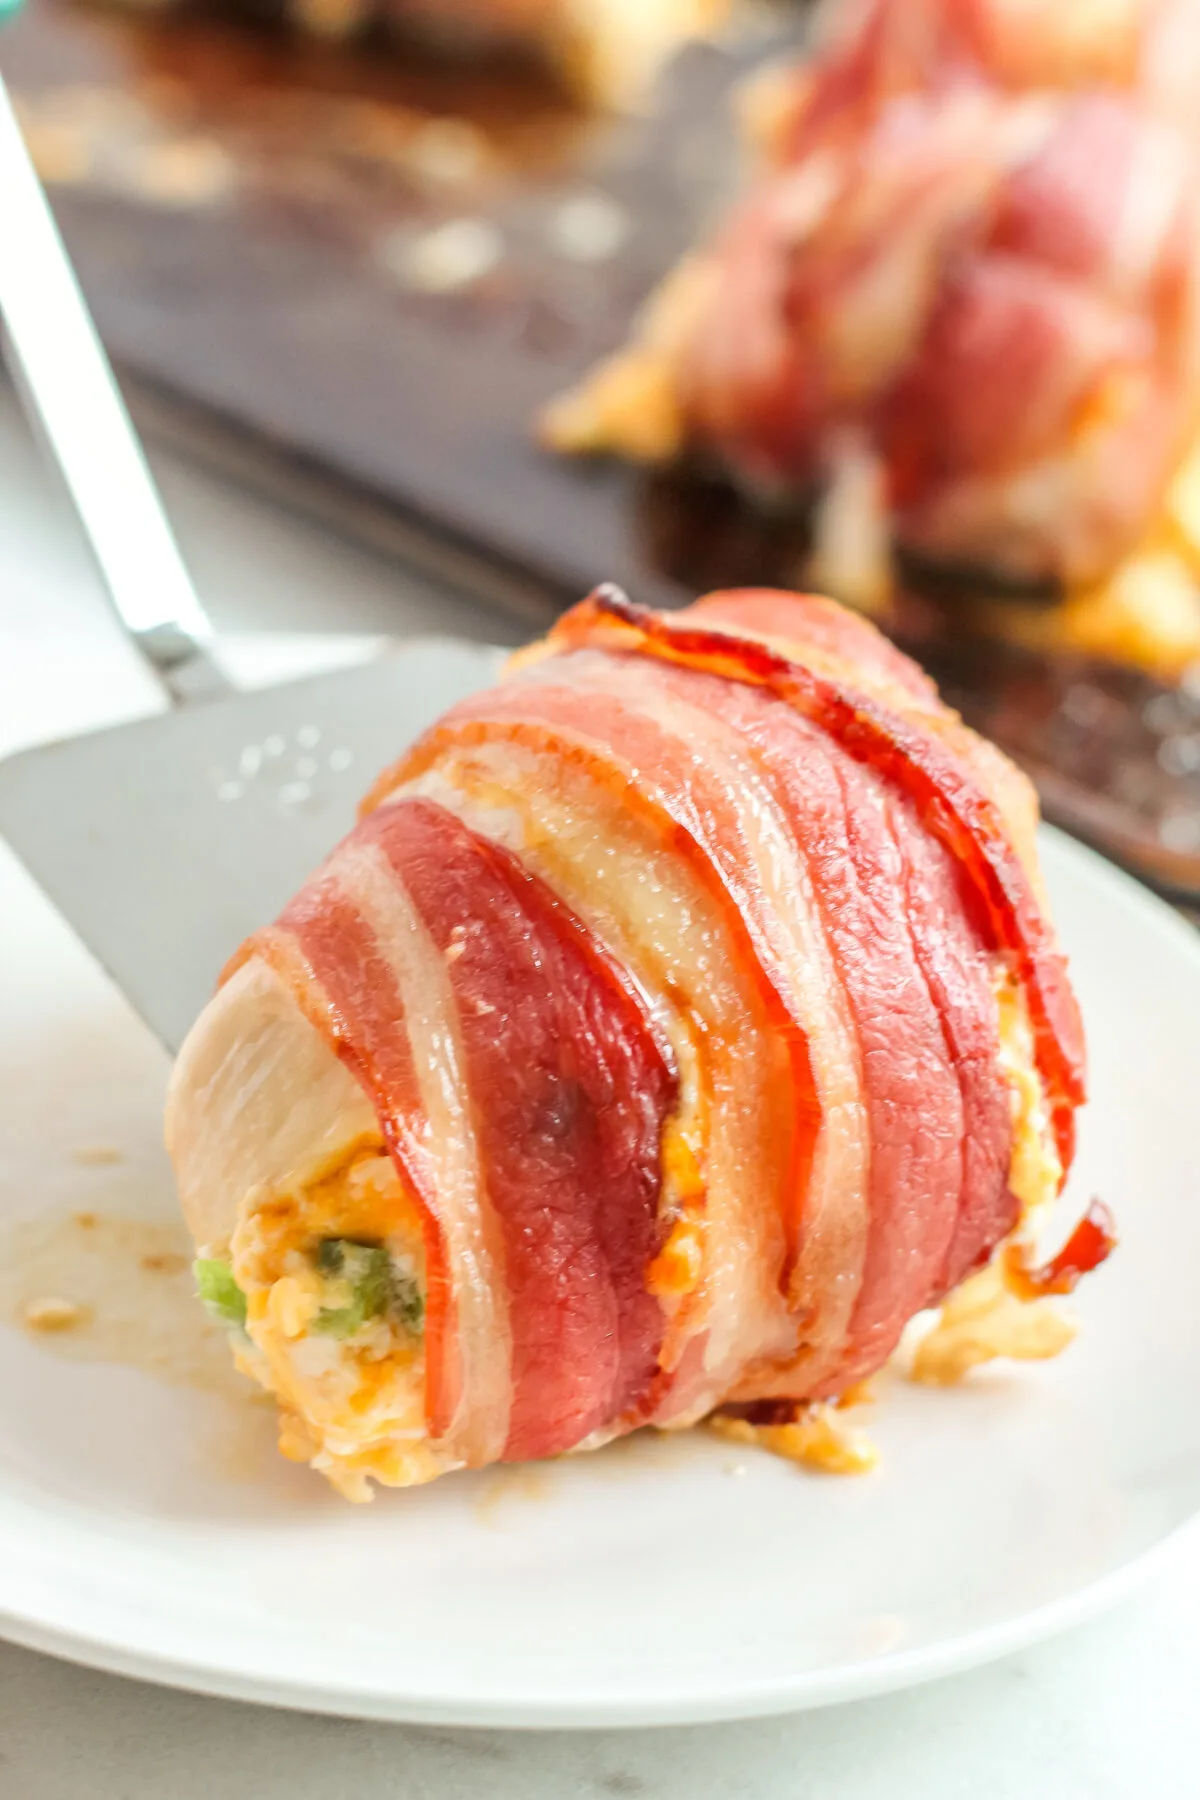 This bacon wrapped jalapeño popper stuffed chicken recipe is the perfect mix of spicy and cheesy! You'll love how easy it is to make this dish.